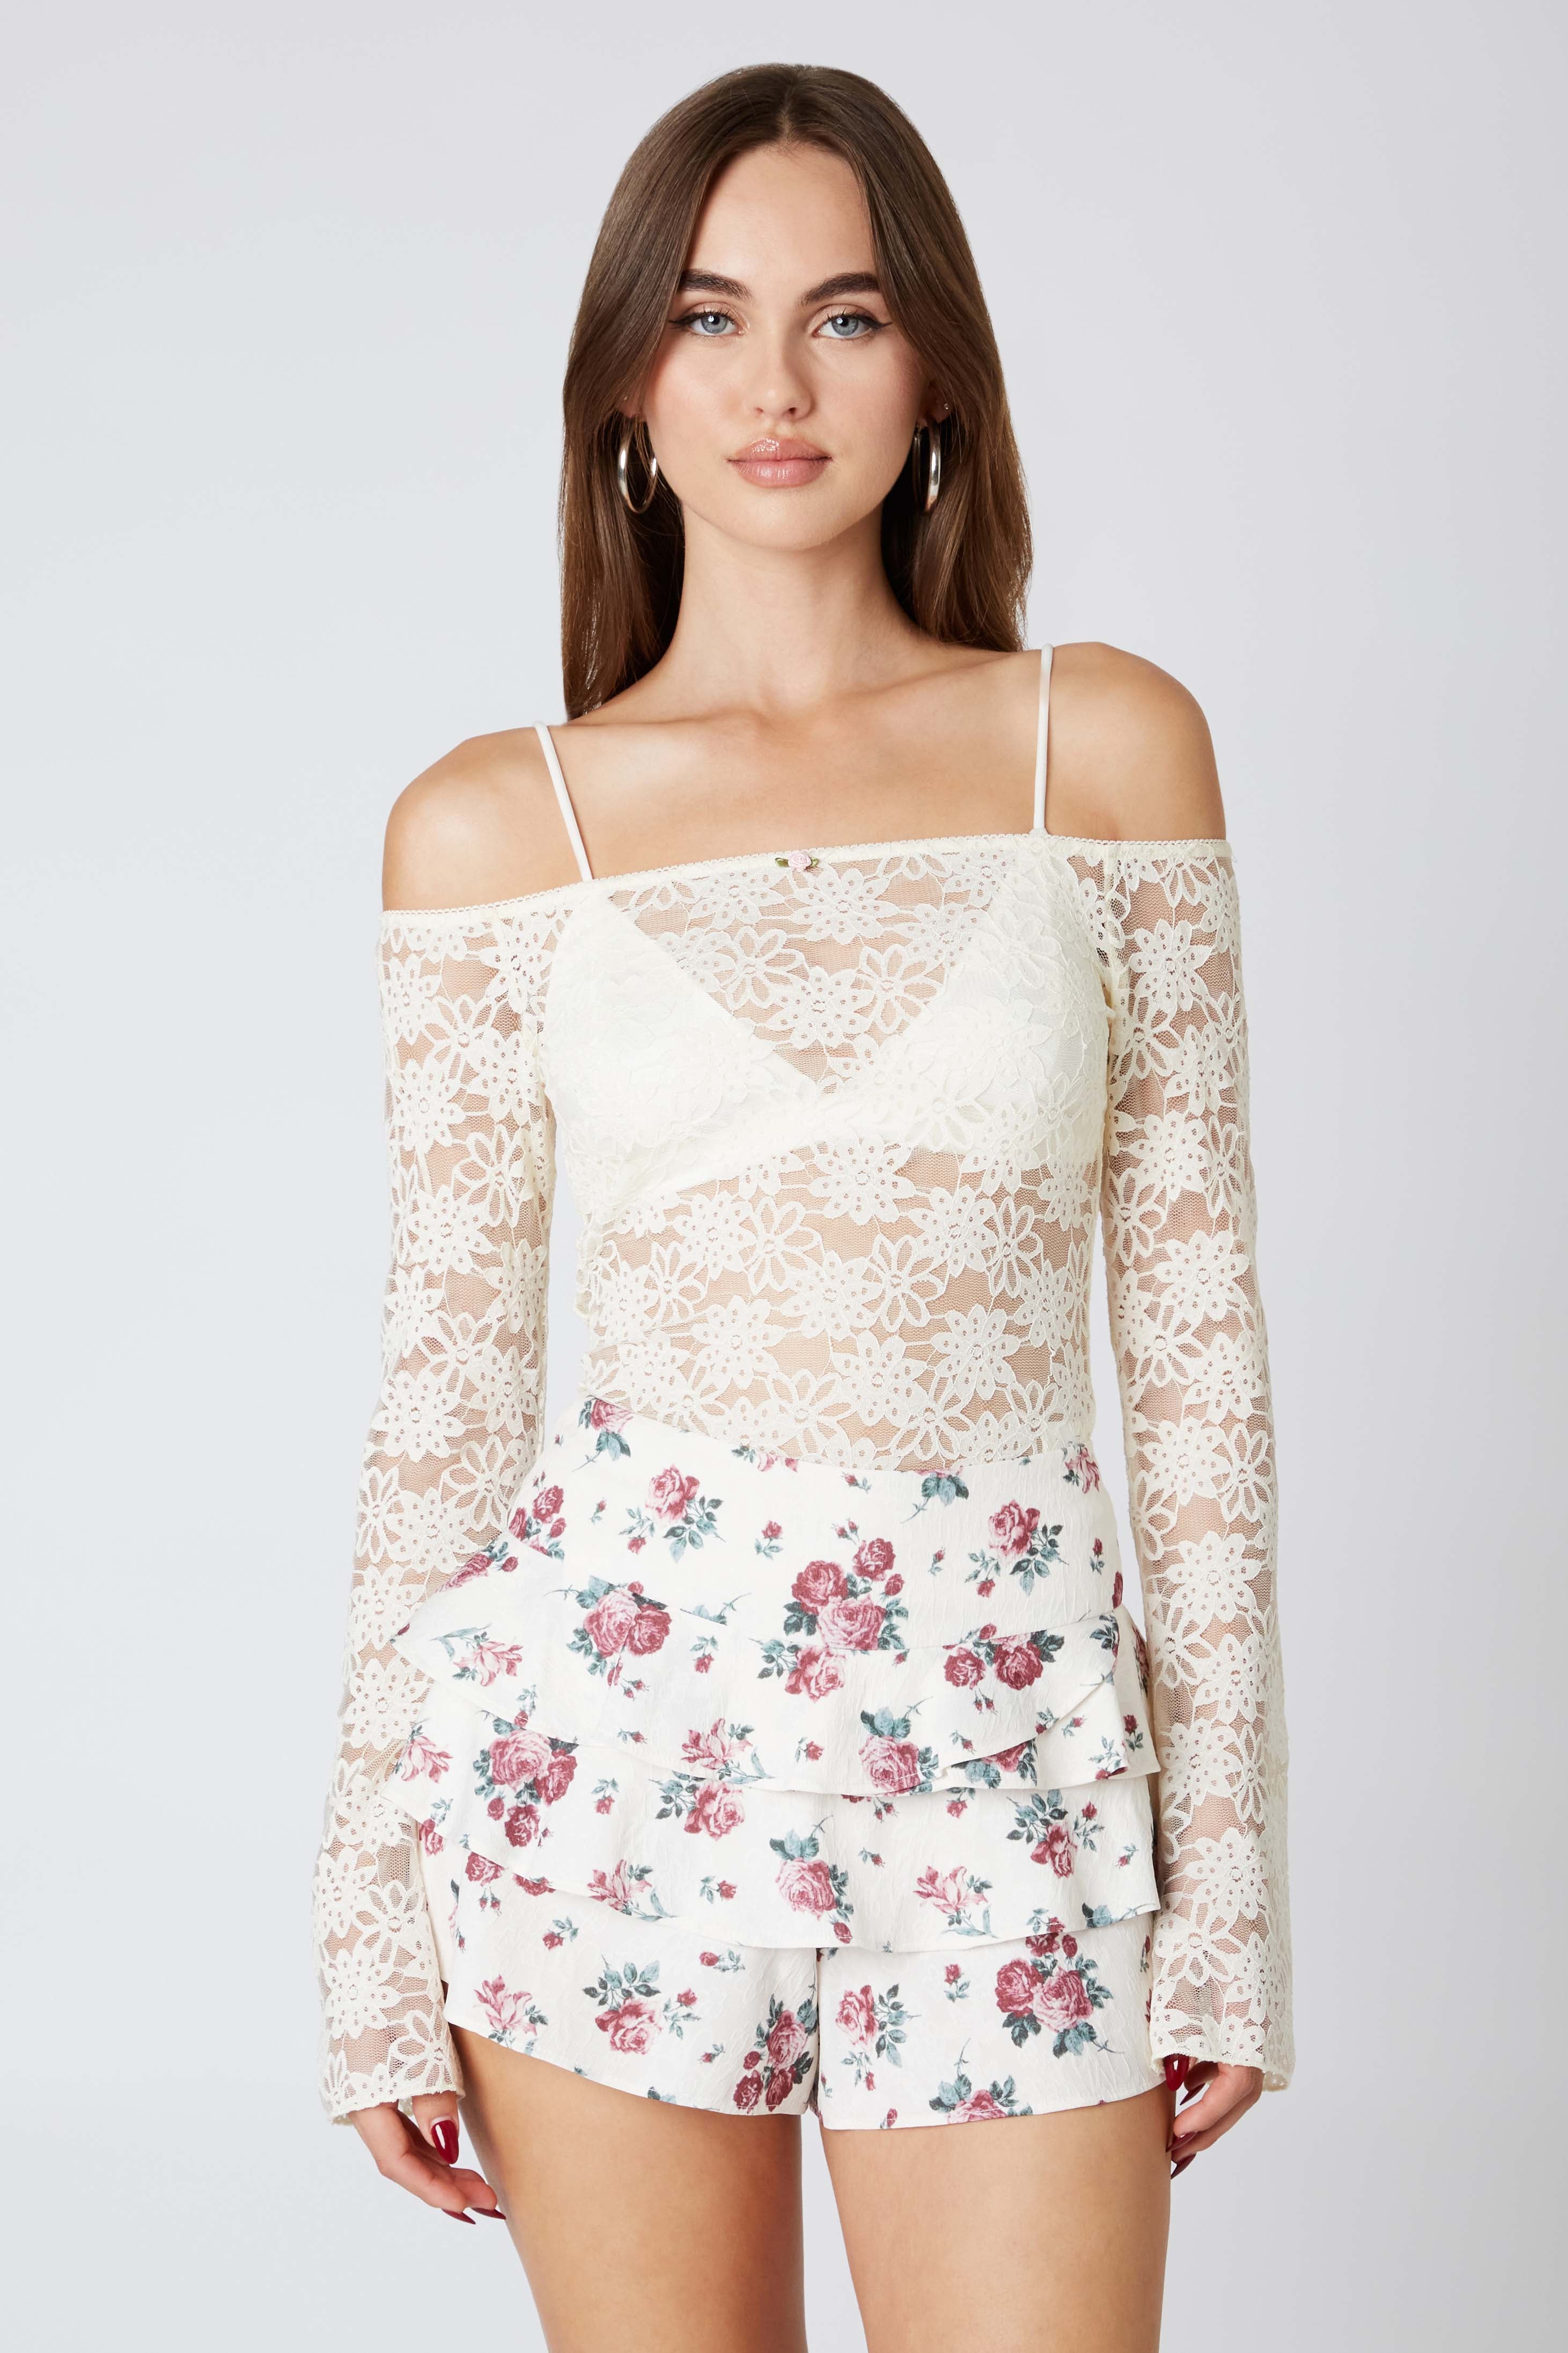 Ruffle Floral Skort in Ivory Front View